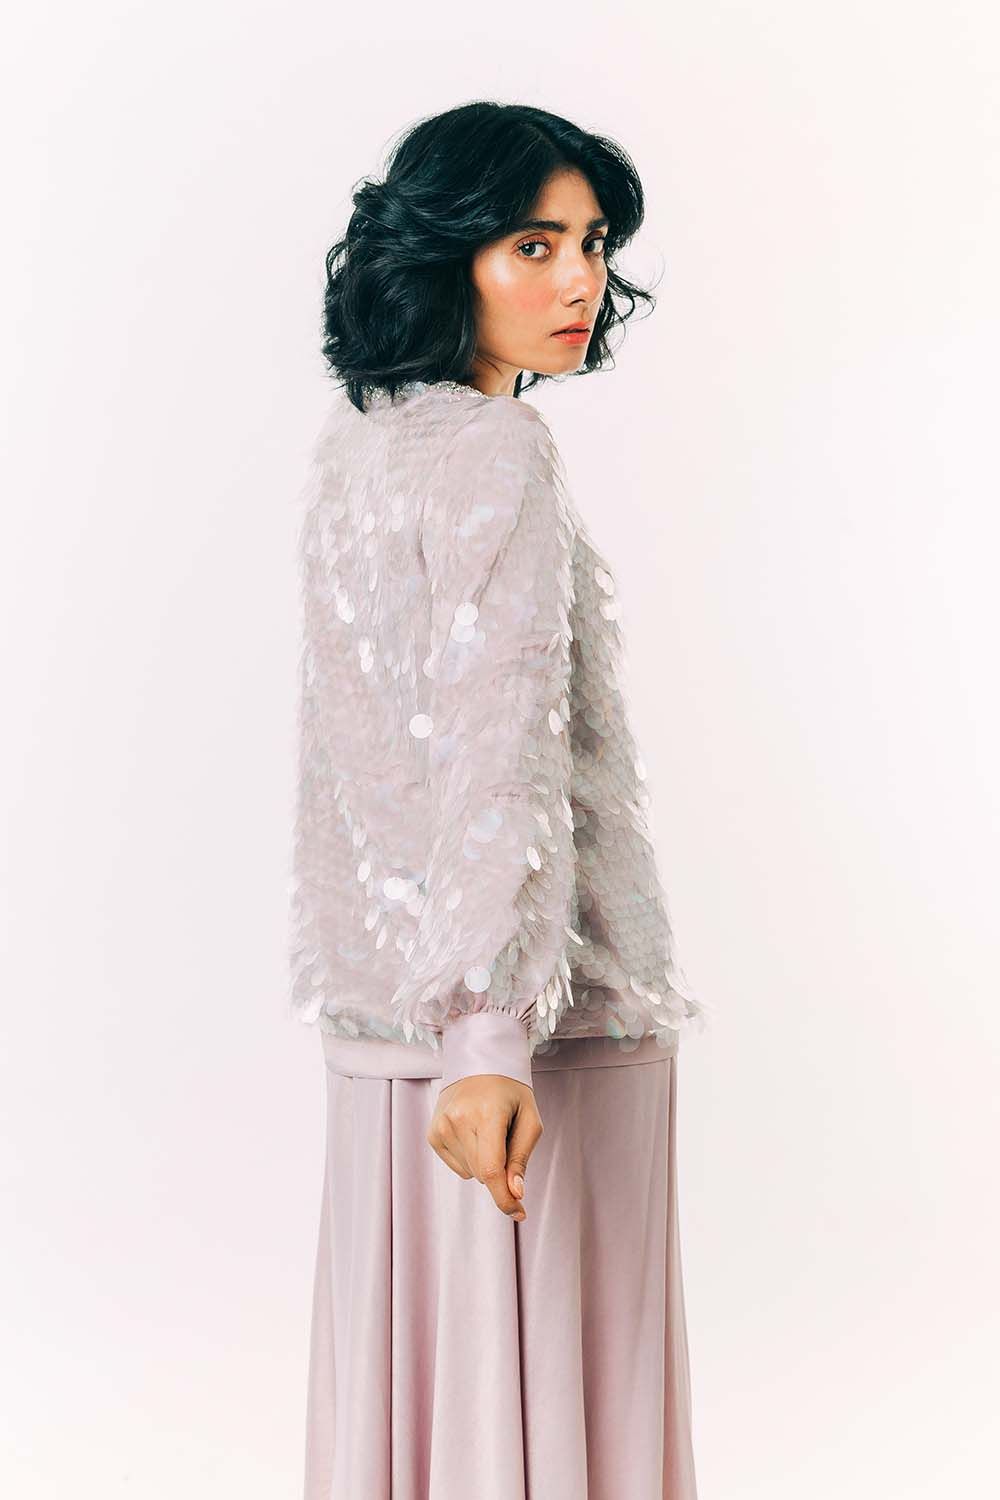 Model wearing a lilac jumper covered in clear rainbow sequins